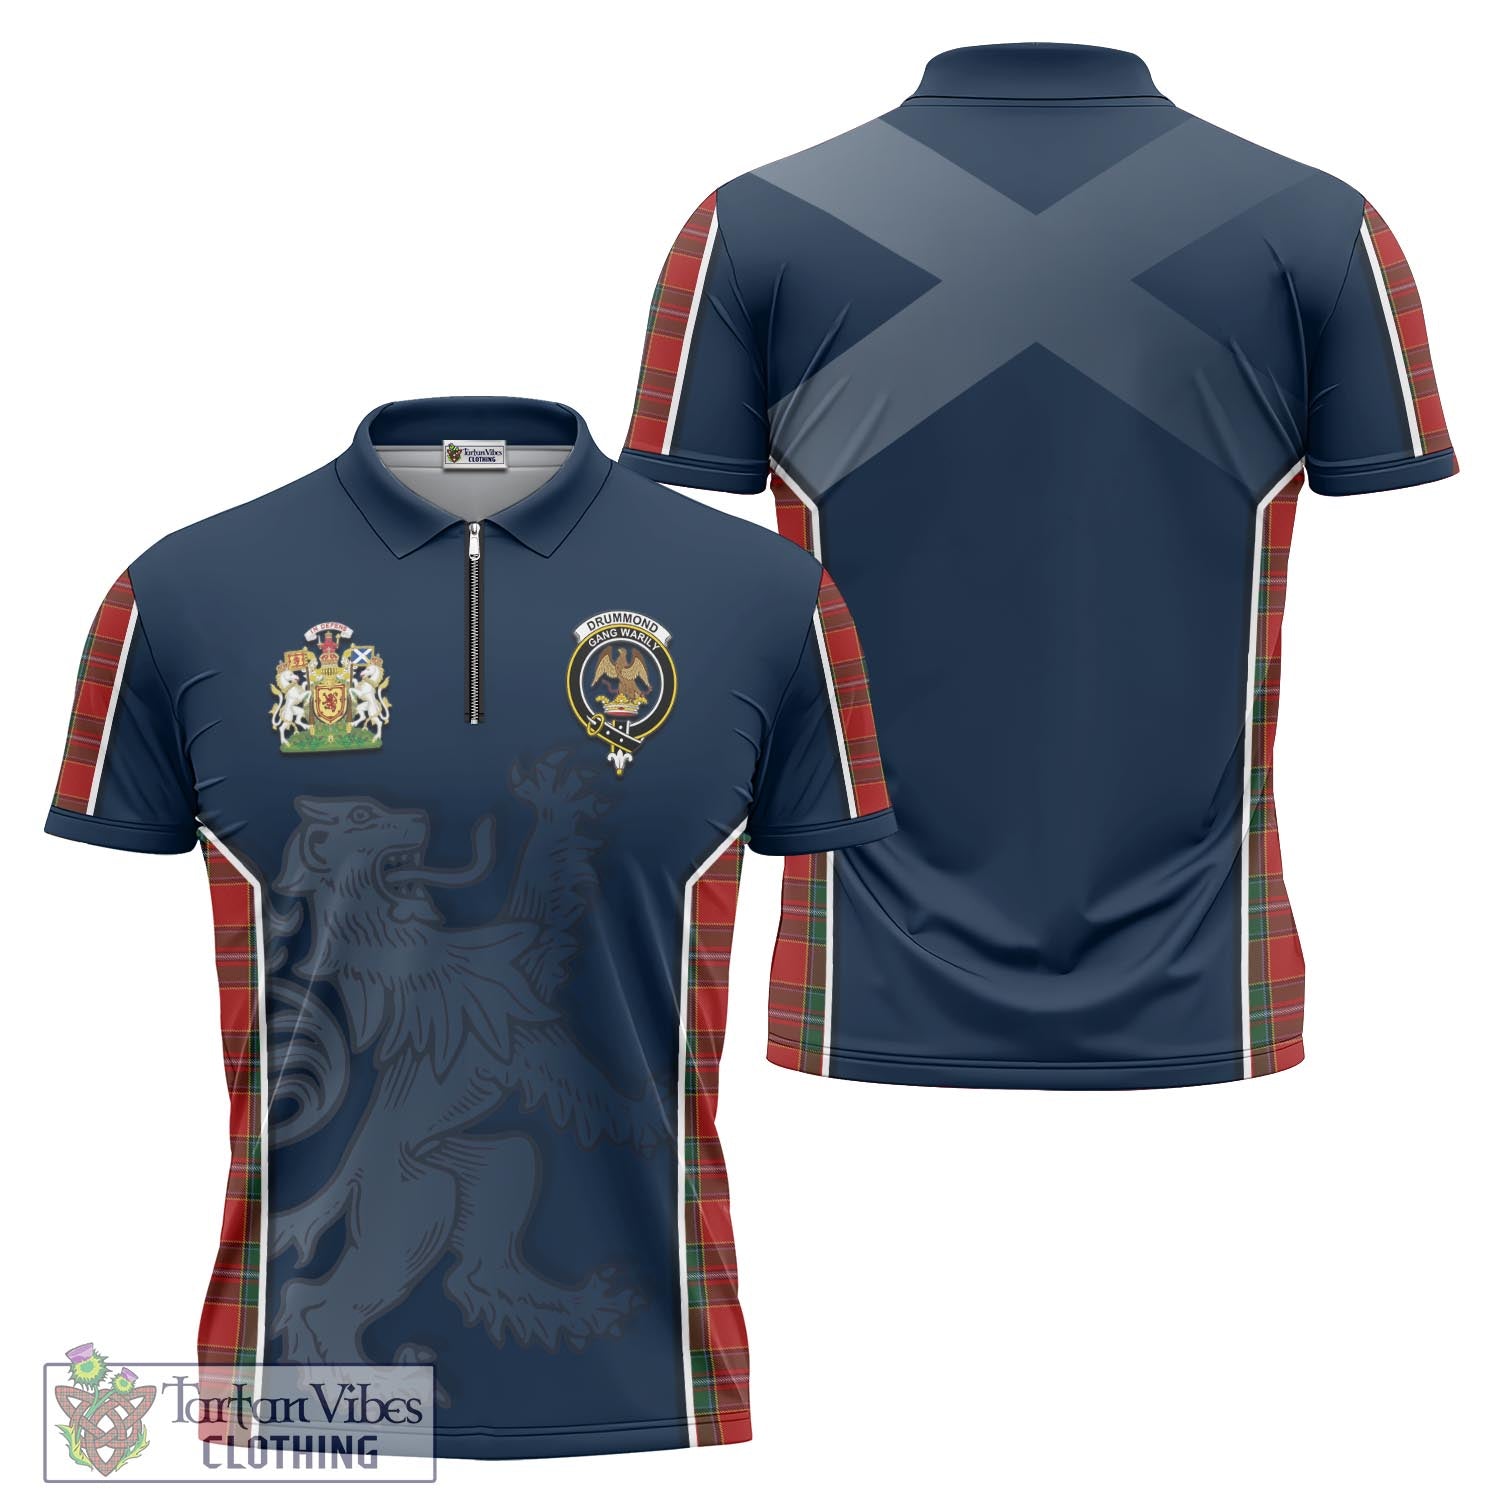 Tartan Vibes Clothing Drummond Ancient Tartan Zipper Polo Shirt with Family Crest and Lion Rampant Vibes Sport Style